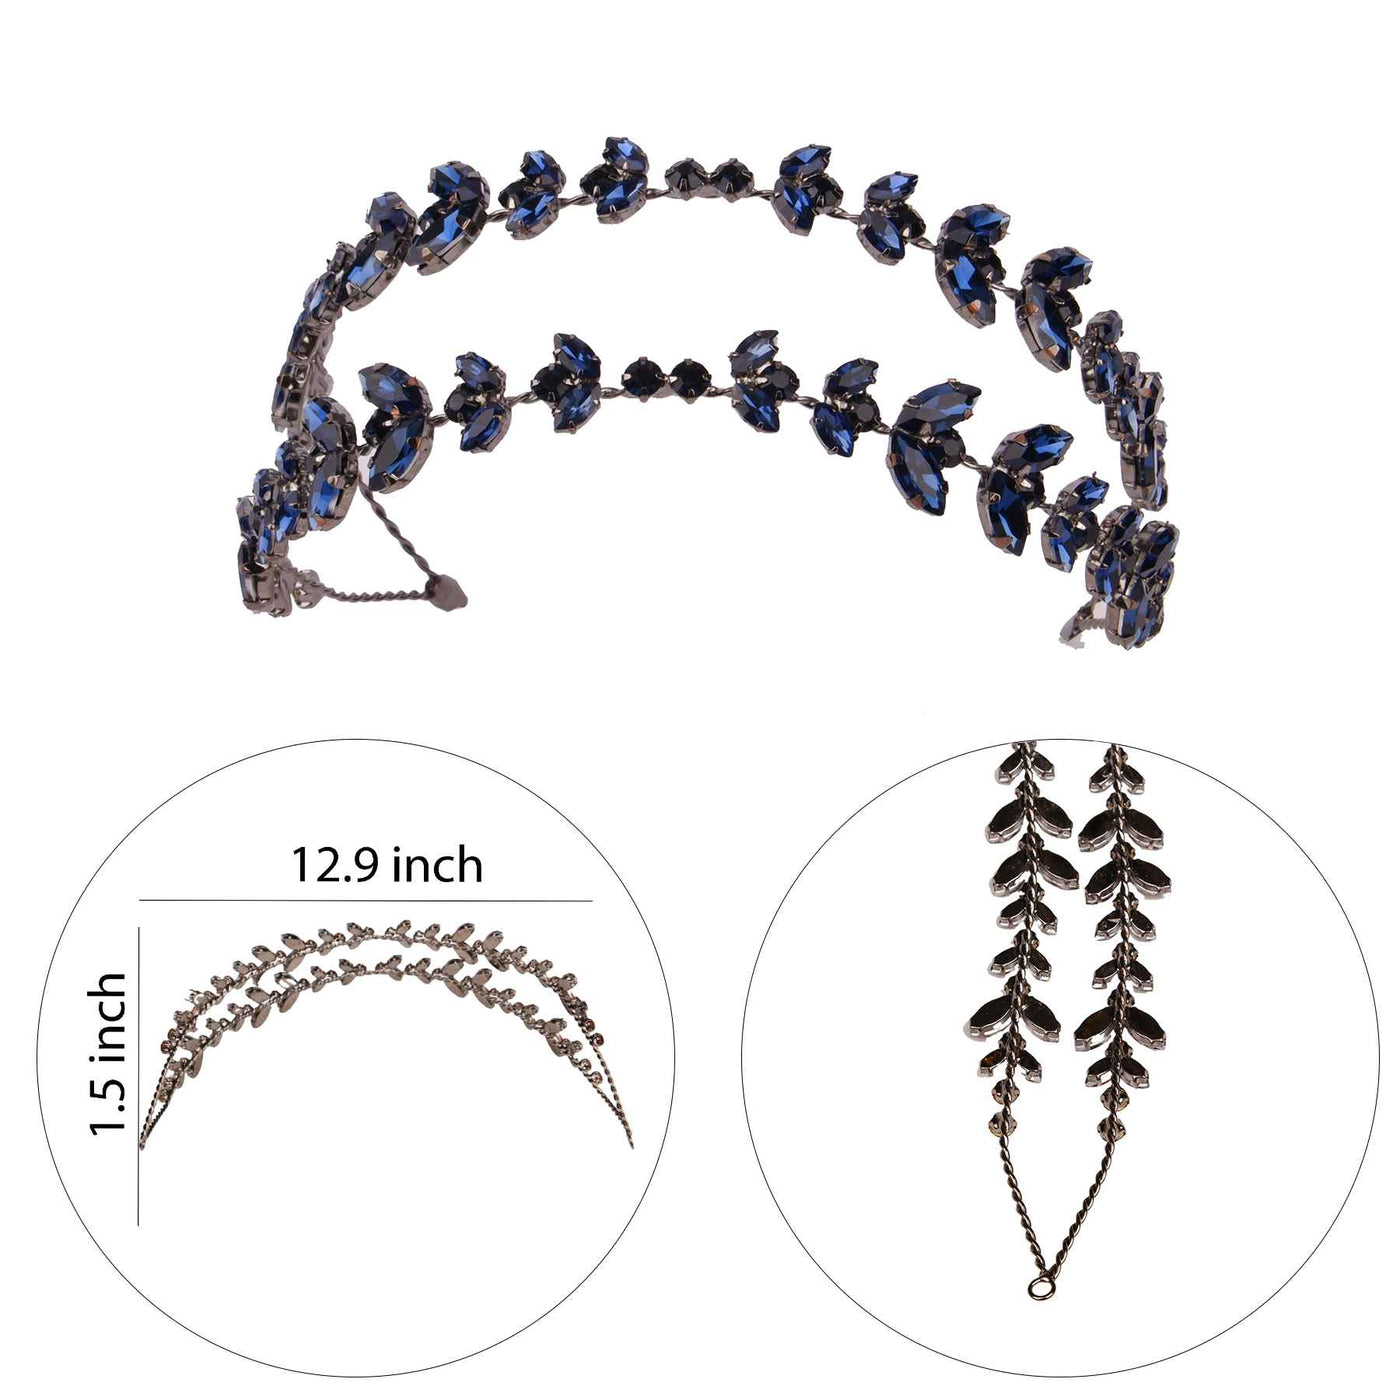 Double Sided Hair Accessory Elegant Women's Crown for Princesses